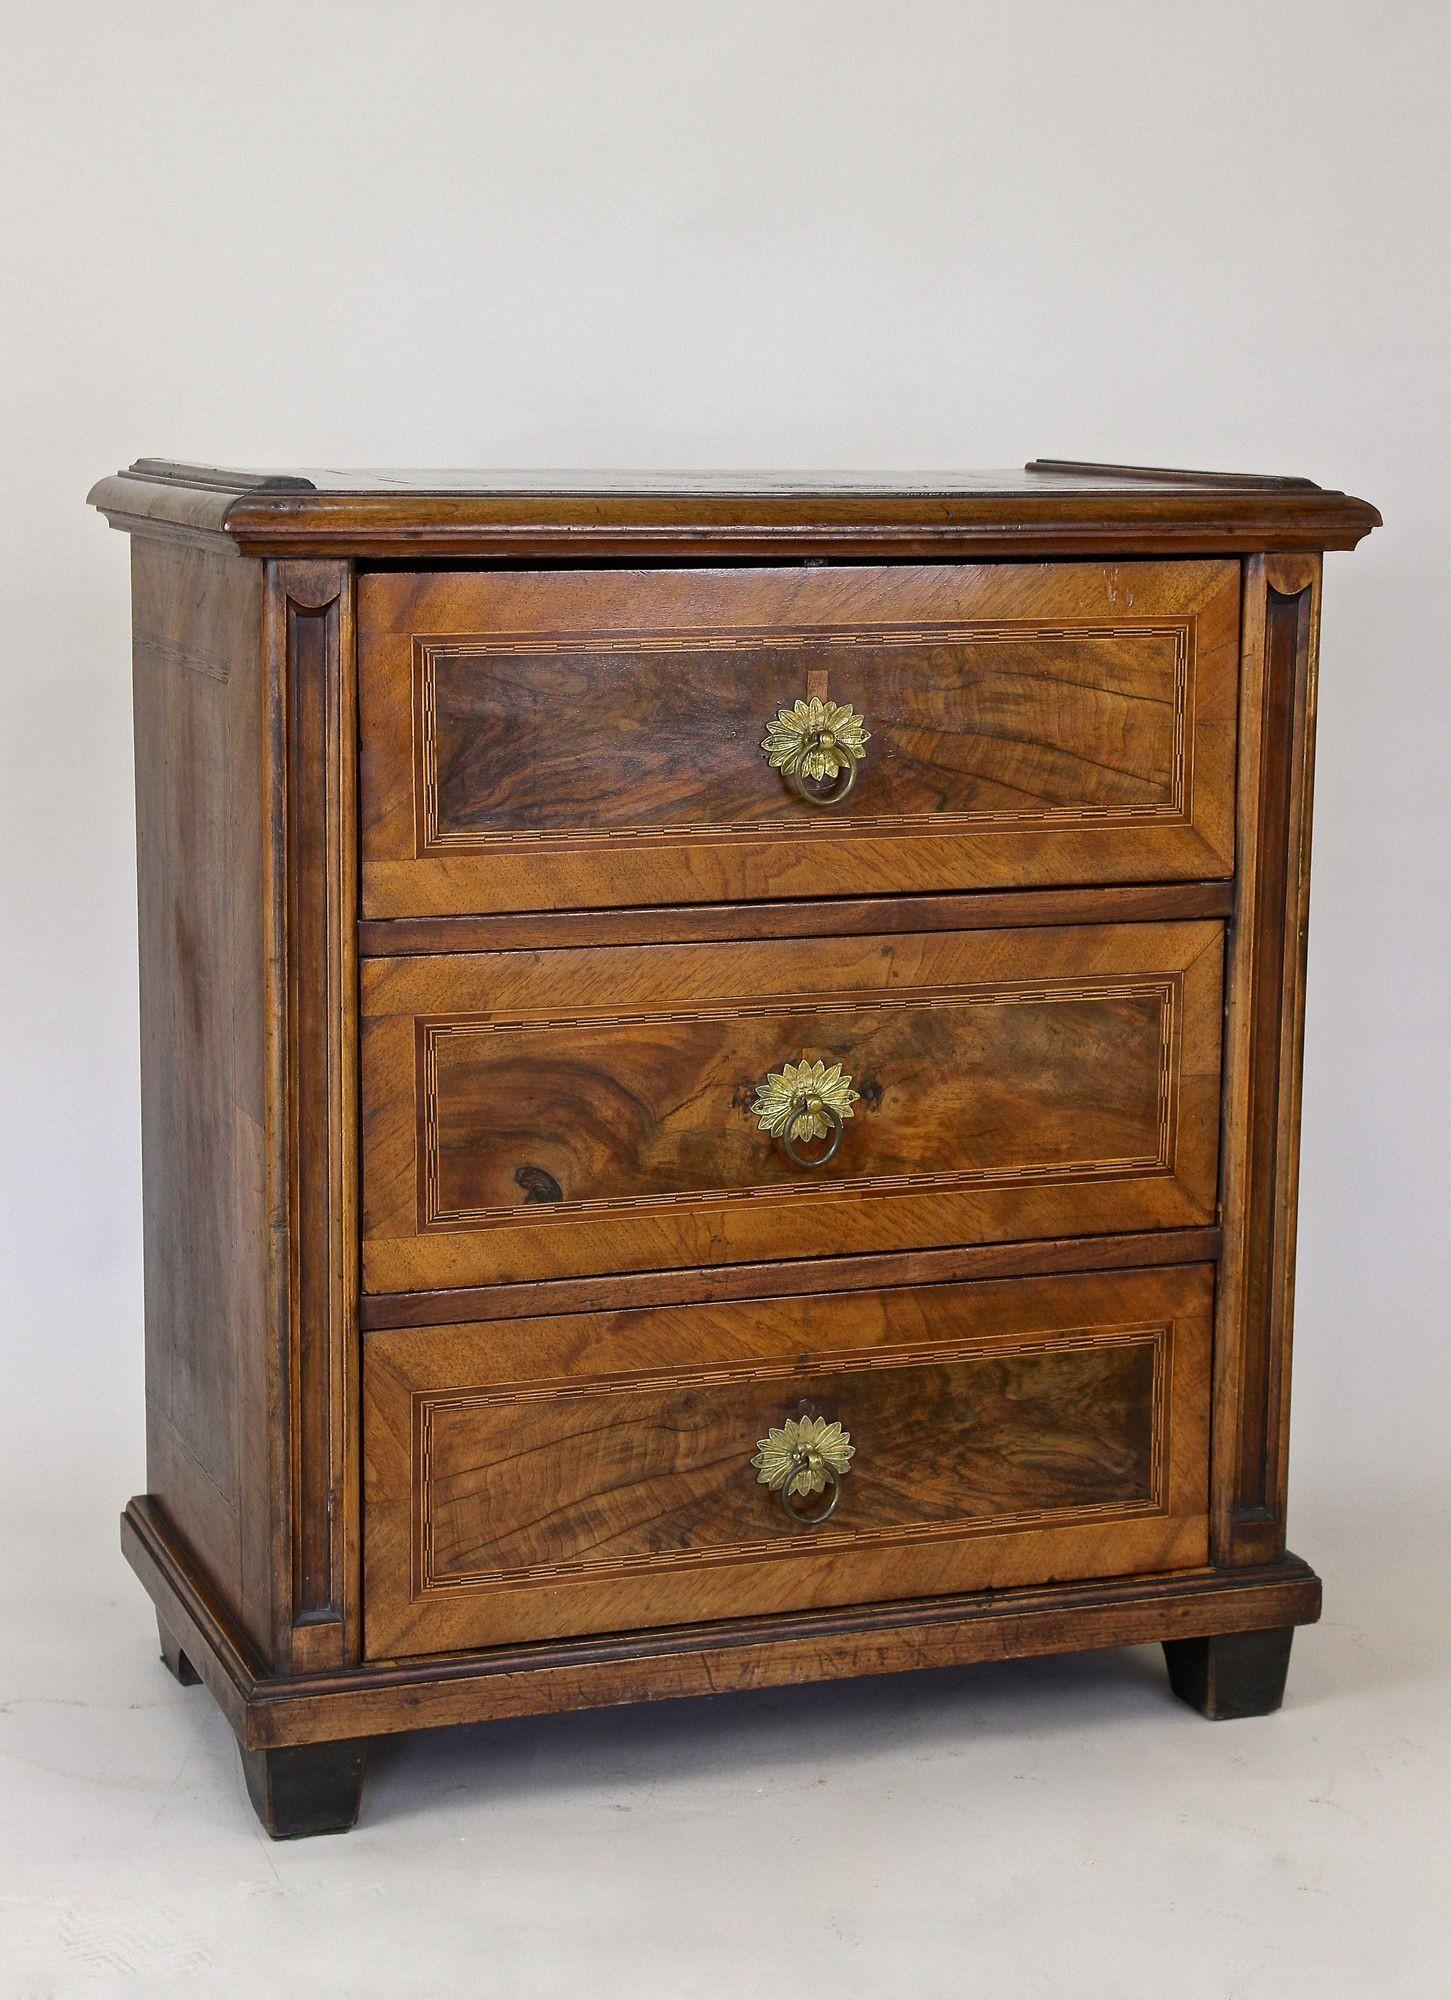 19th Century Biedermeier Nutwood Chest Of Drawers With Micro-Inlays, AT ca. 1850 For Sale 1